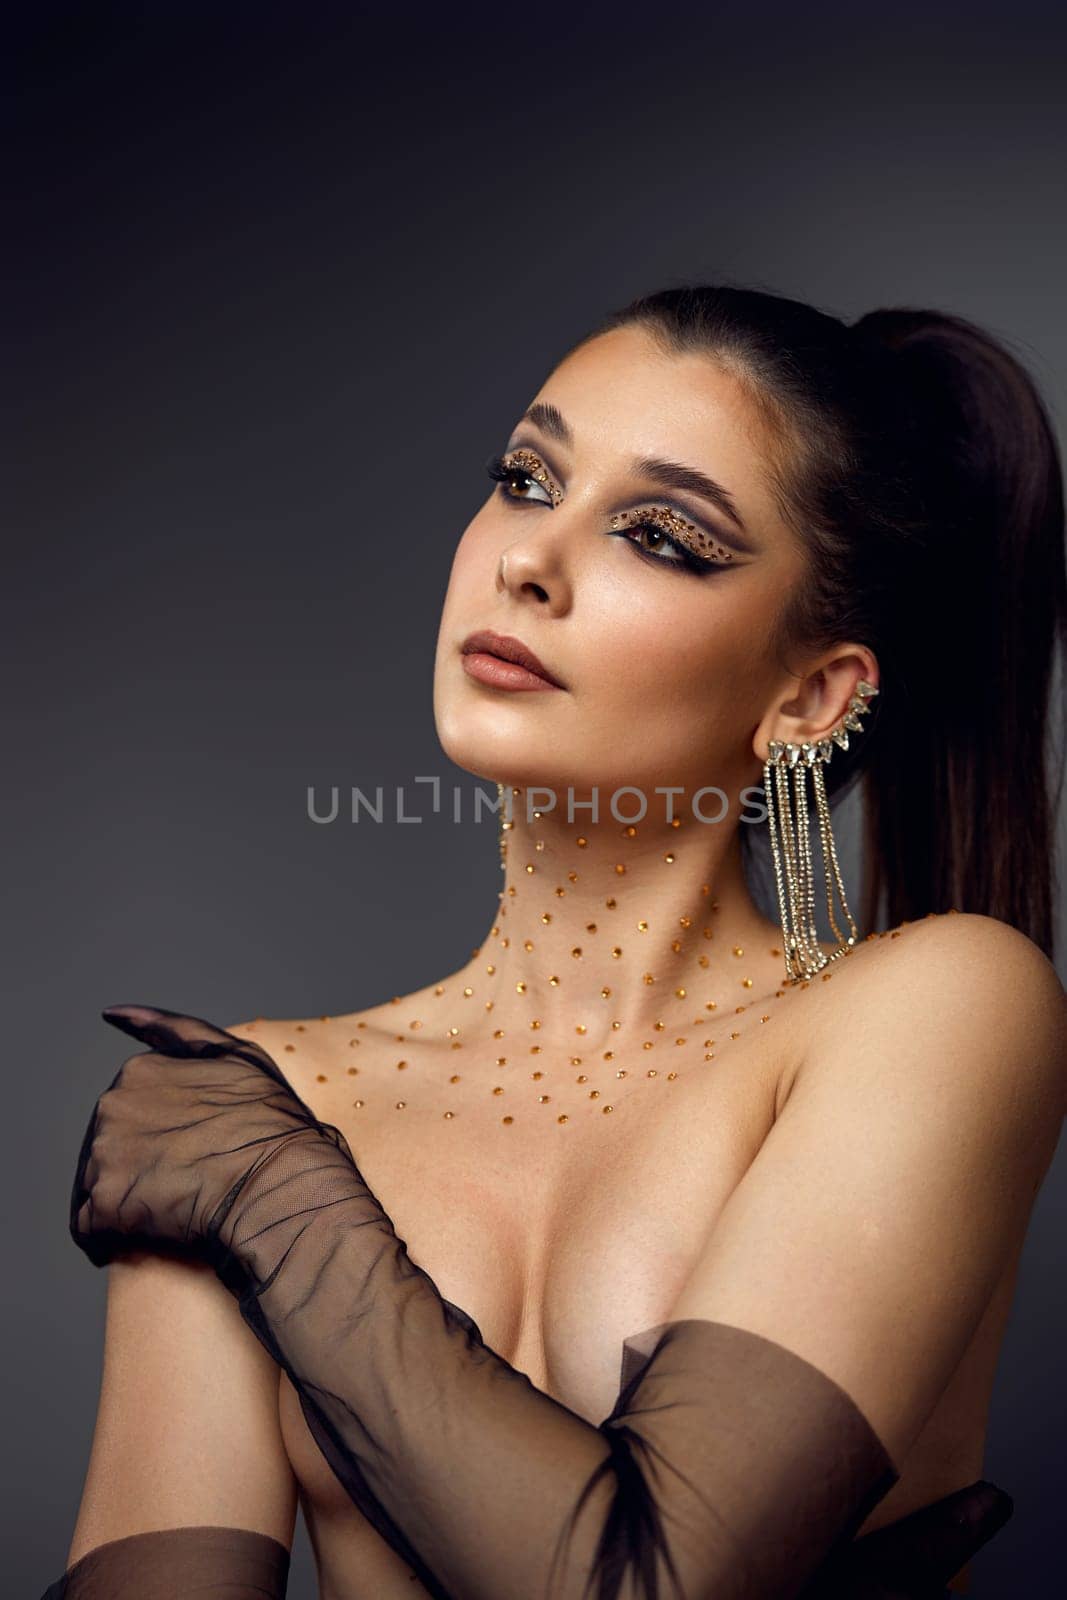 beauty fashionable model woman with creative eye makeup with arrows and rhinestones in long earring on gray background